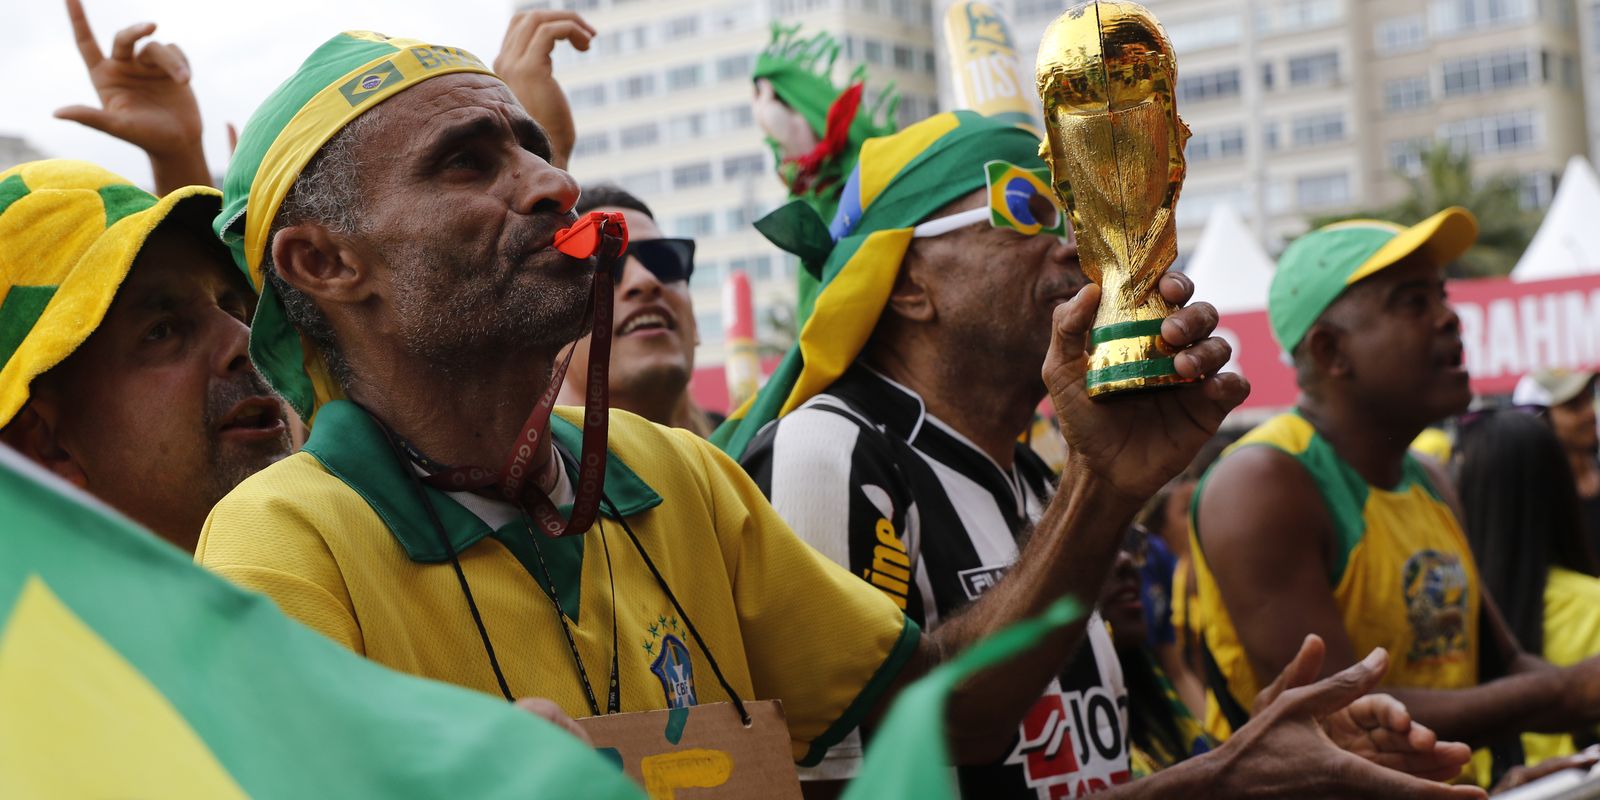 With Brazil’s victory, the party in Lapa should continue into the early hours
– News X